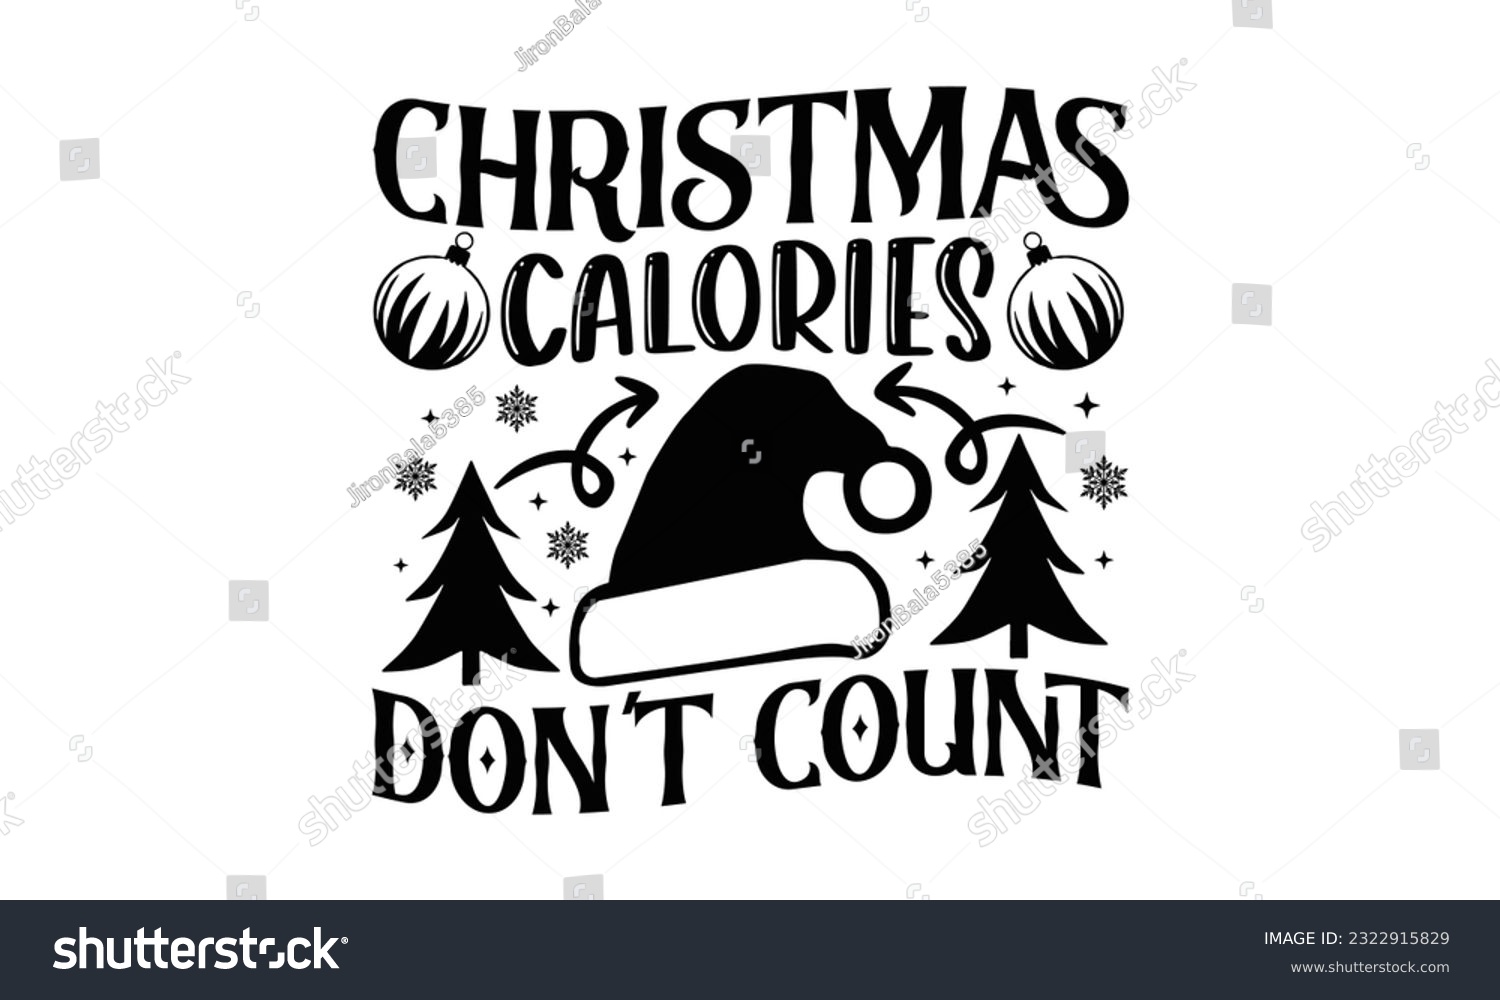 SVG of  Christmas Calories Don't Count - Christmas SVG Design, Hand drawn lettering phrase isolated on white background, Illustration for prints on t-shirts, bags, posters, cards and Mug. svg